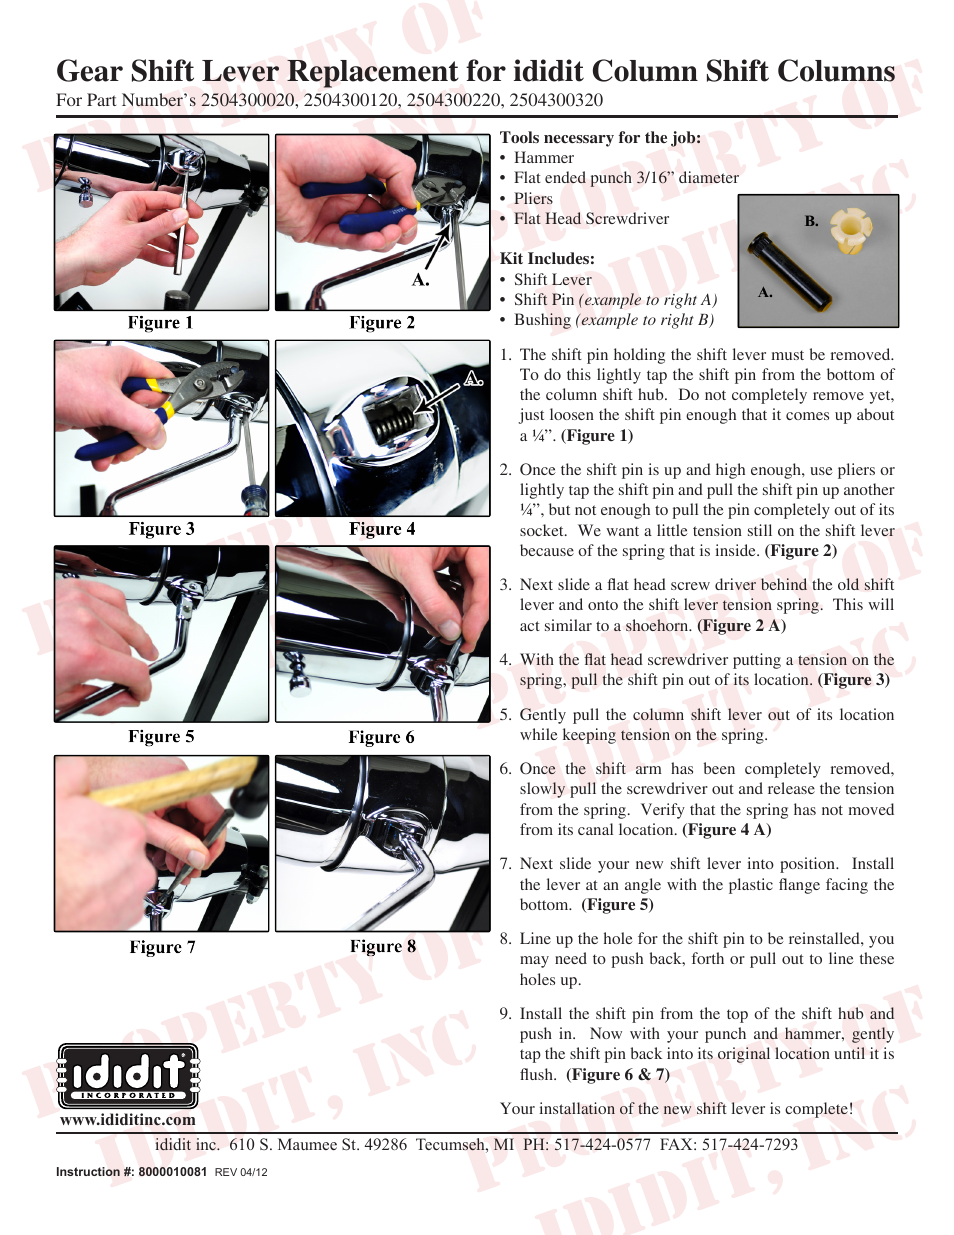 Gear Shift Lever Replacement